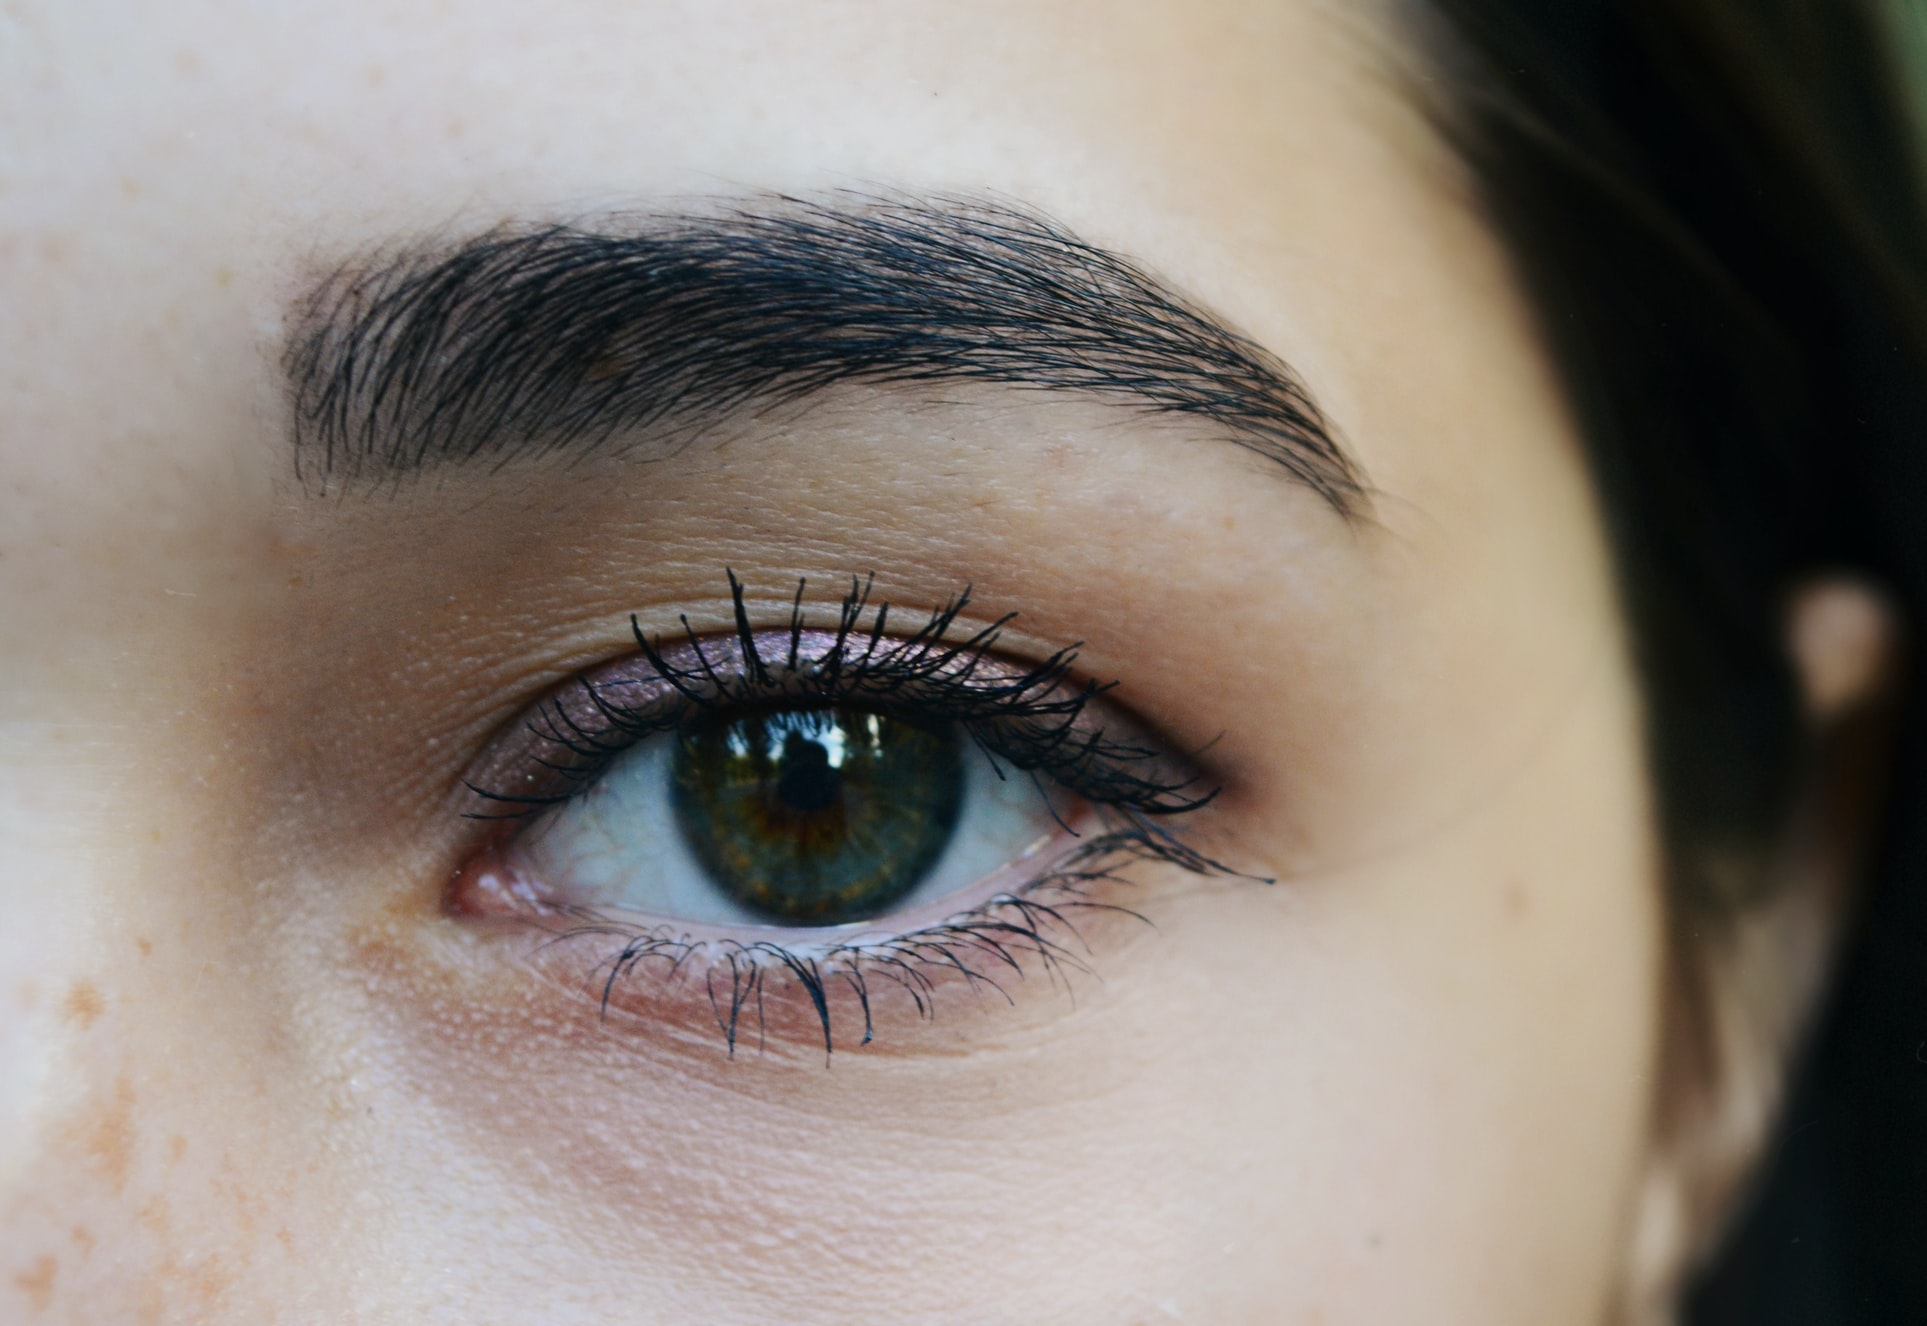 How To Become A Licensed Eyelash Technician